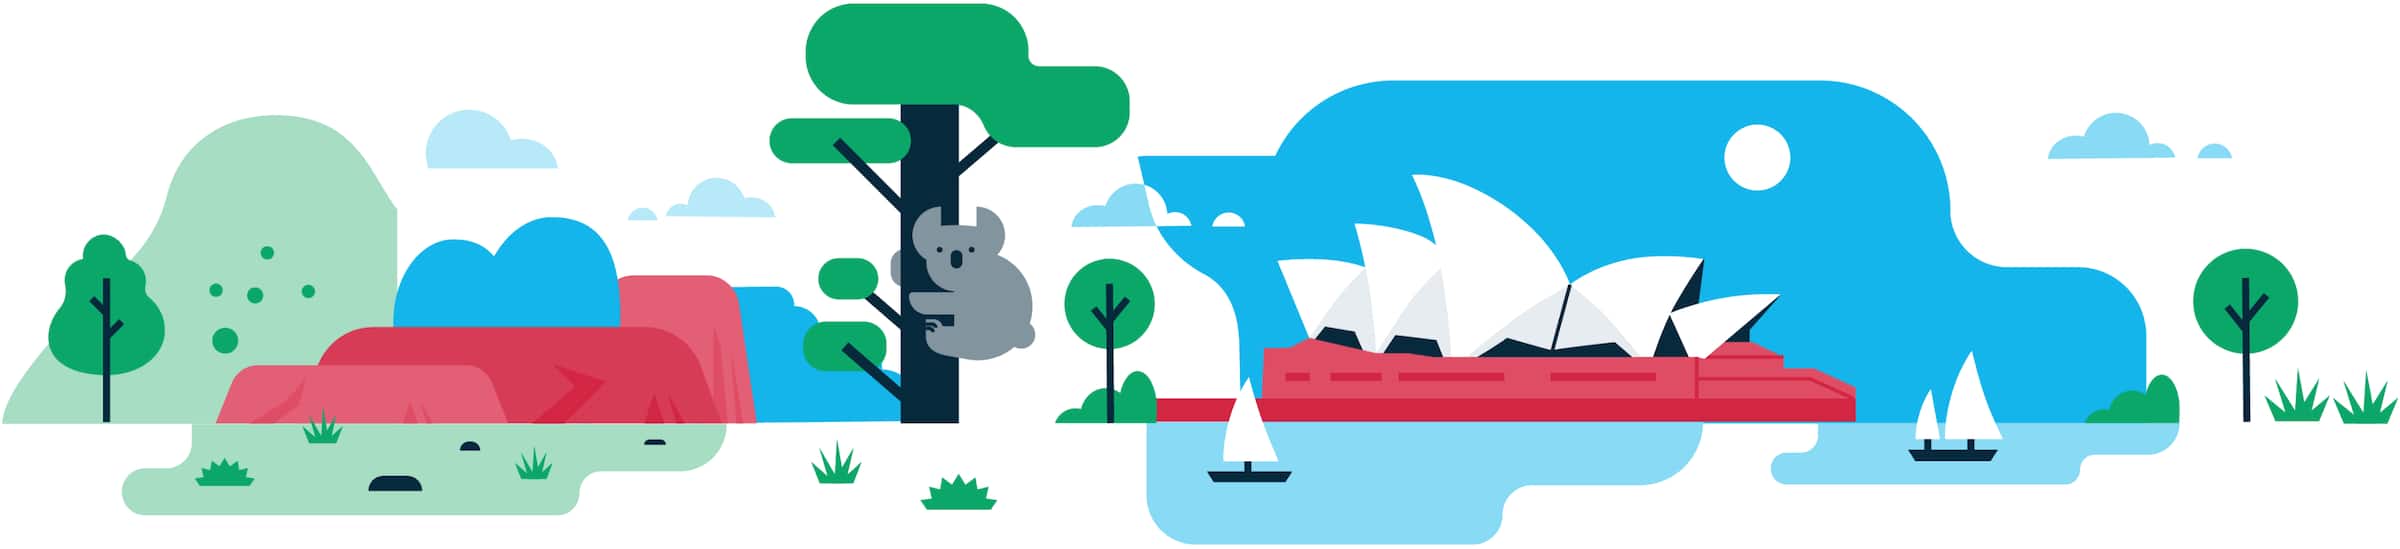 A header image for Xero’s Sydney office, in Australia, shows some of the city’s best-known landmarks and attractions.